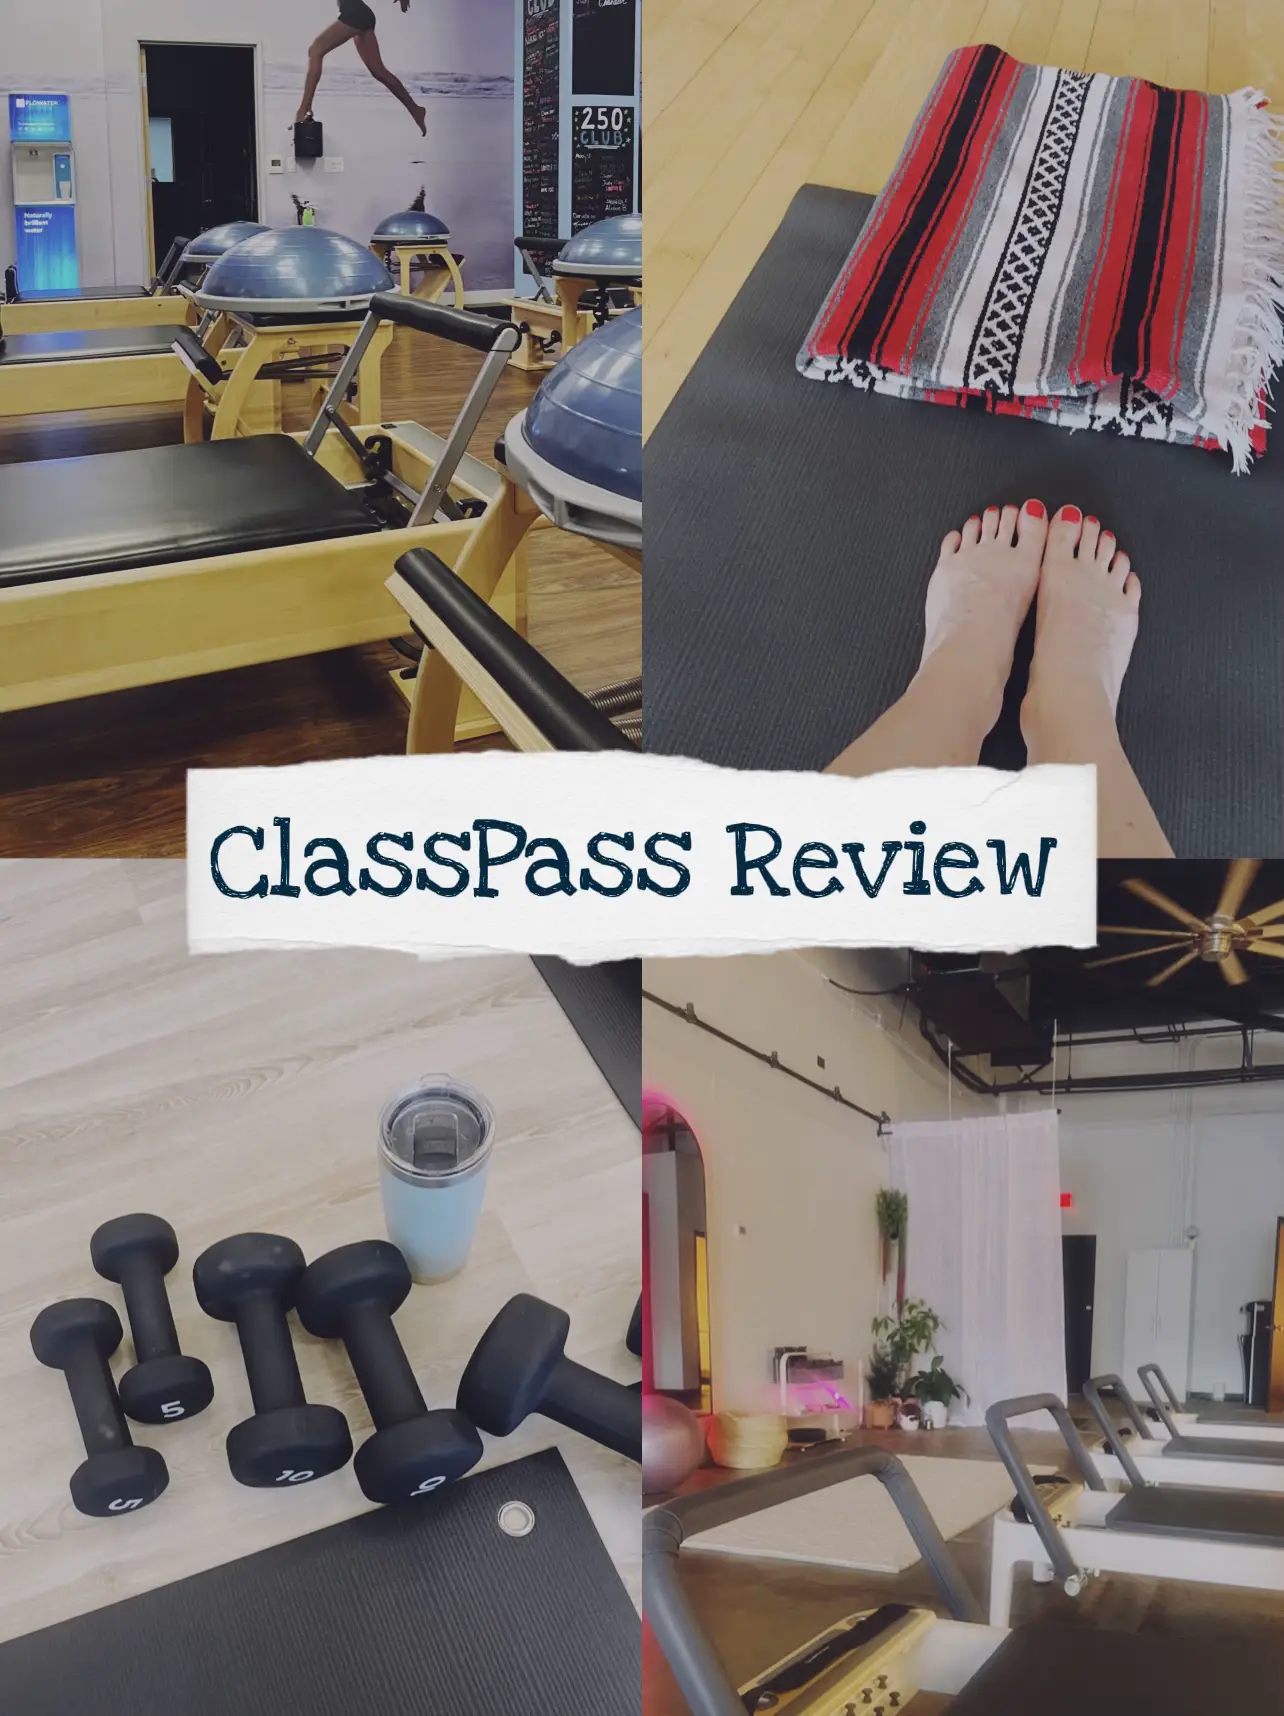 Natural Pilates - West Hollywood: Read Reviews and Book Classes on ClassPass